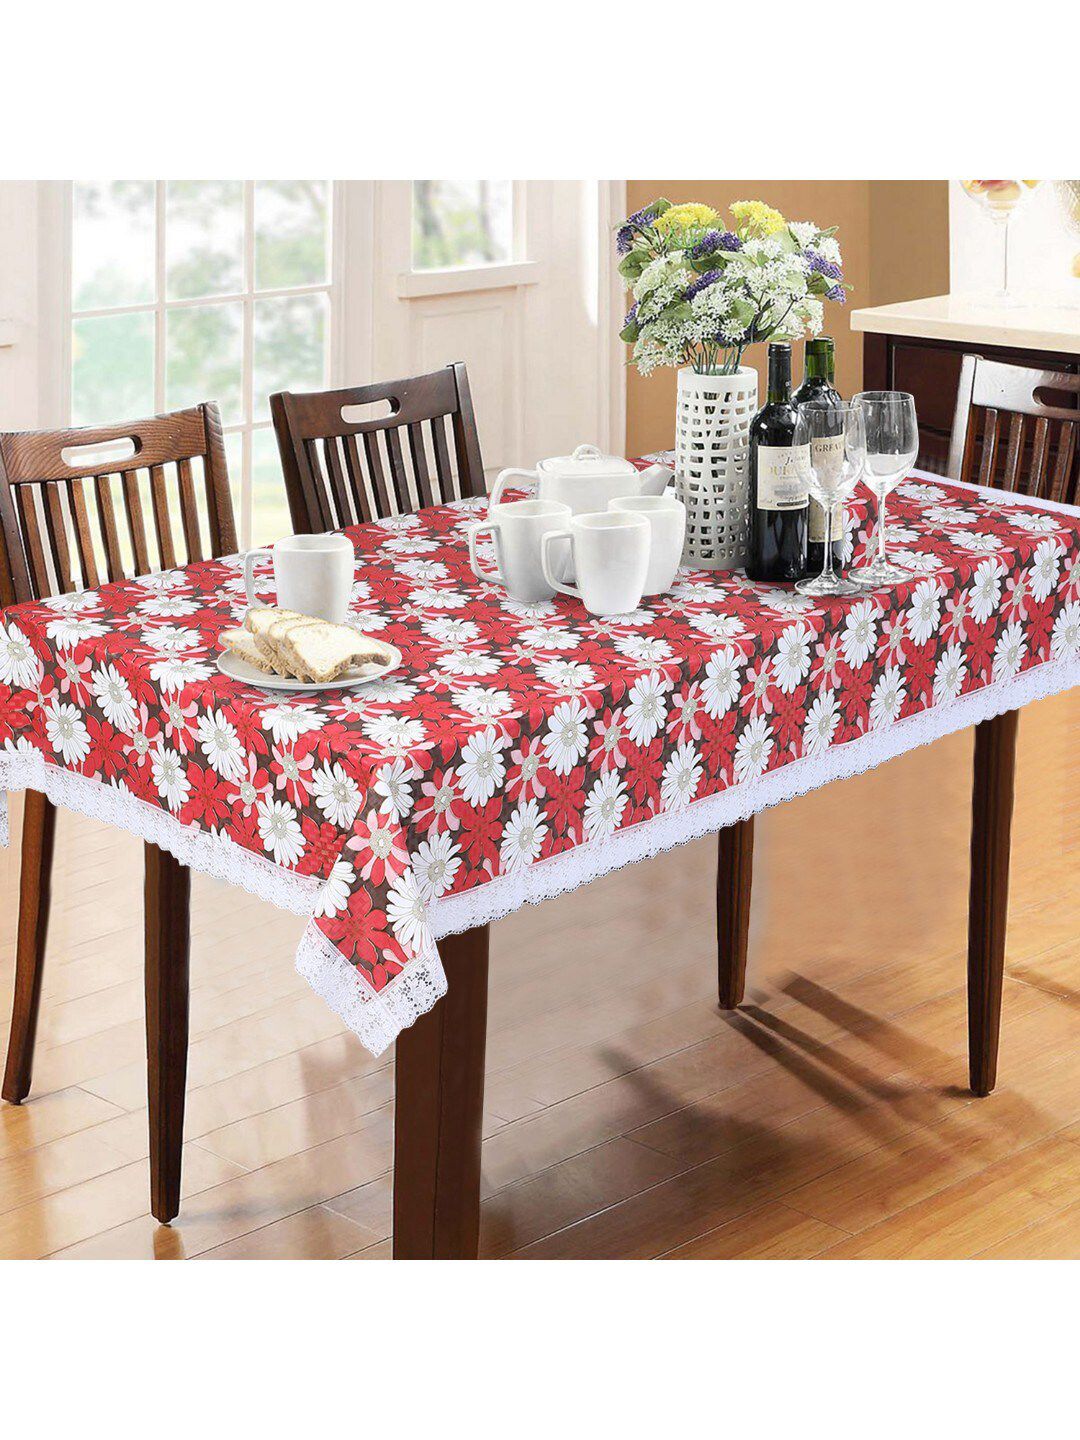 Dakshya Industries Red & White Floral Printed 6 Seater Table Covers Price in India